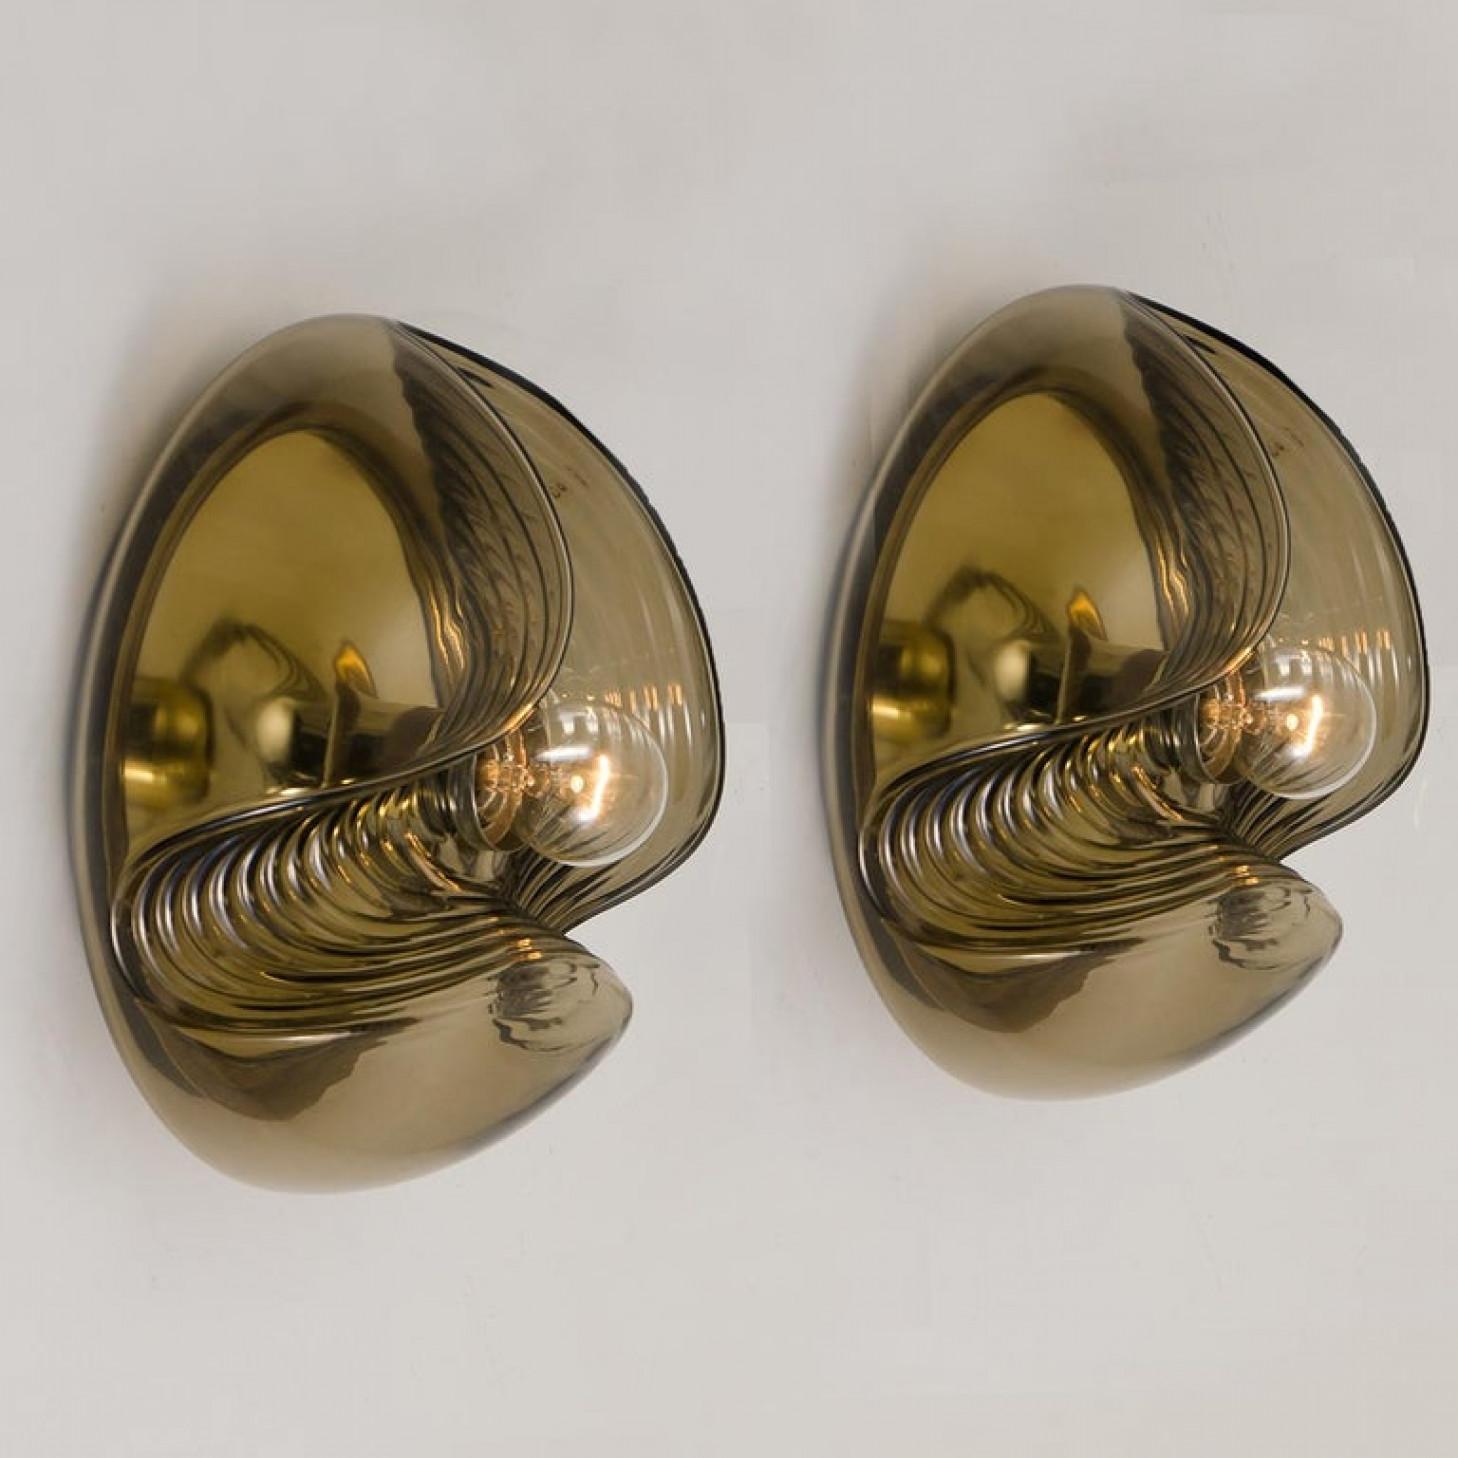 Pair of Koch & Lowy Smoked Glass Wall Sconces/Lights by Peill Putzler, 1970 For Sale 7